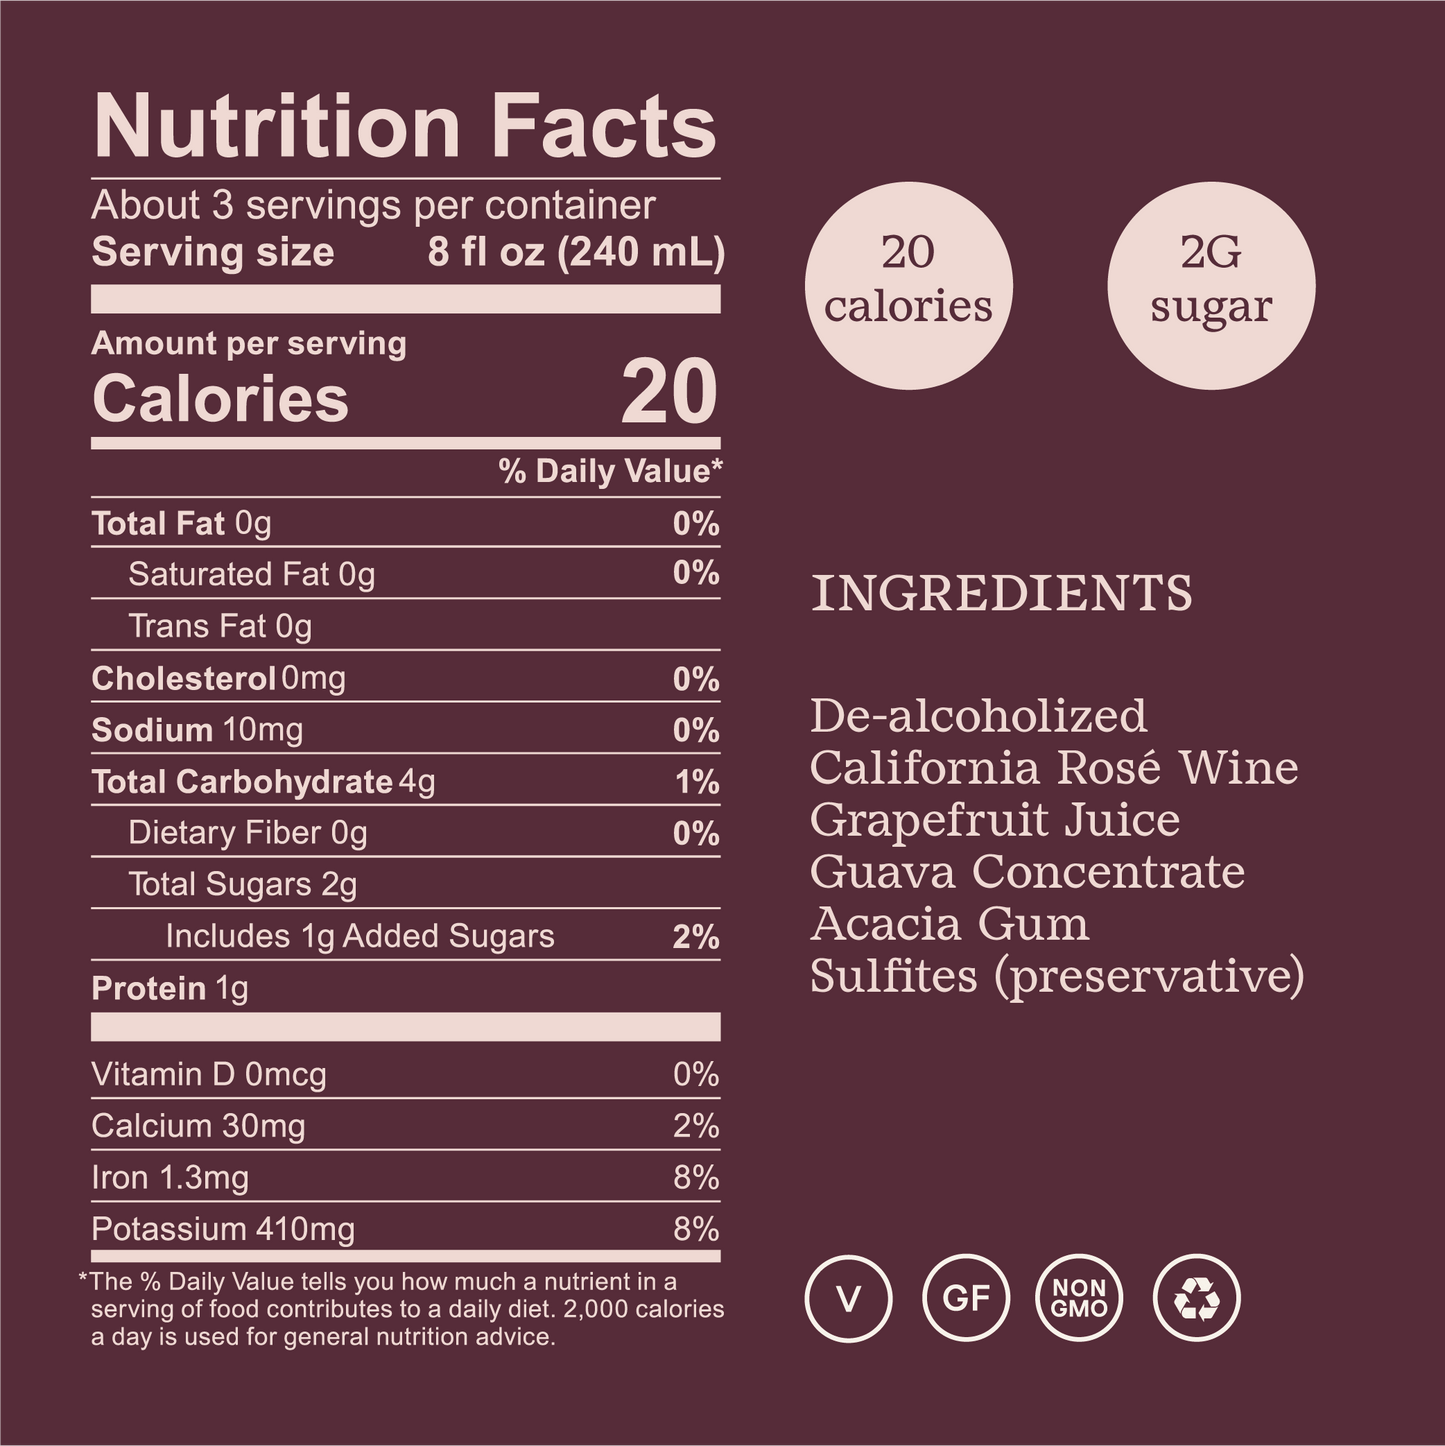 Surely Sparkling Rose nutrition facts